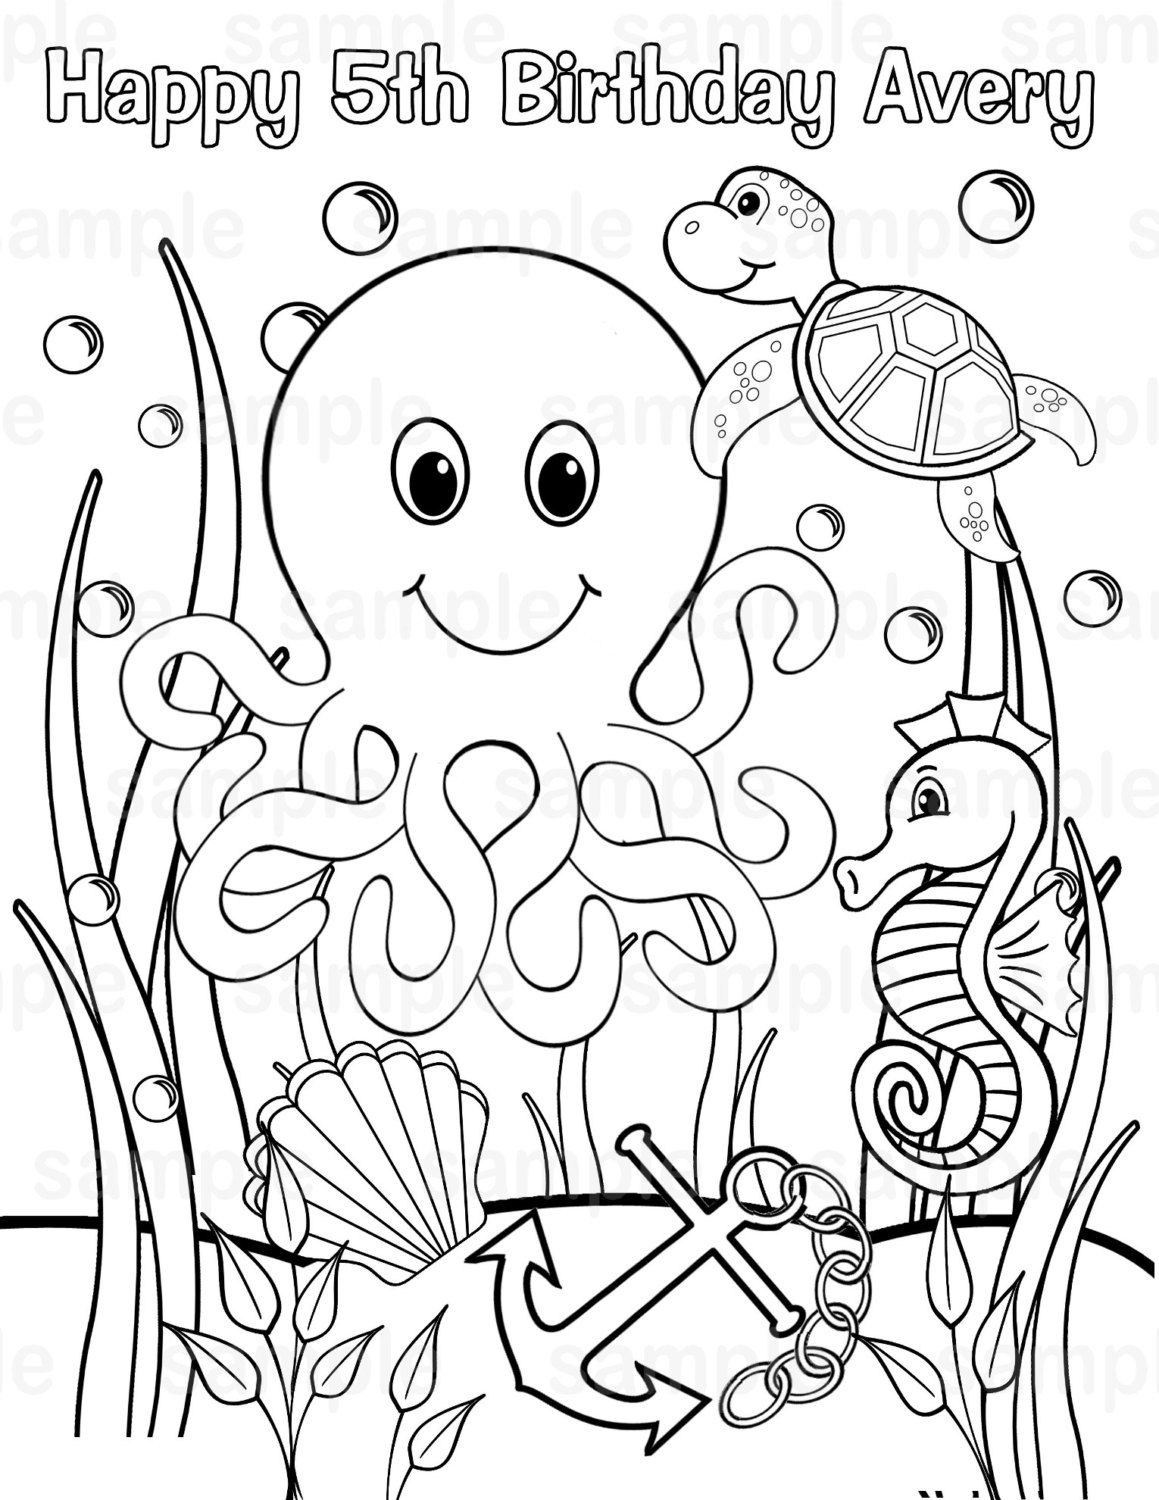 Personalized under the sea coloring page birthday party favor colouring activity sheet personalized printable template